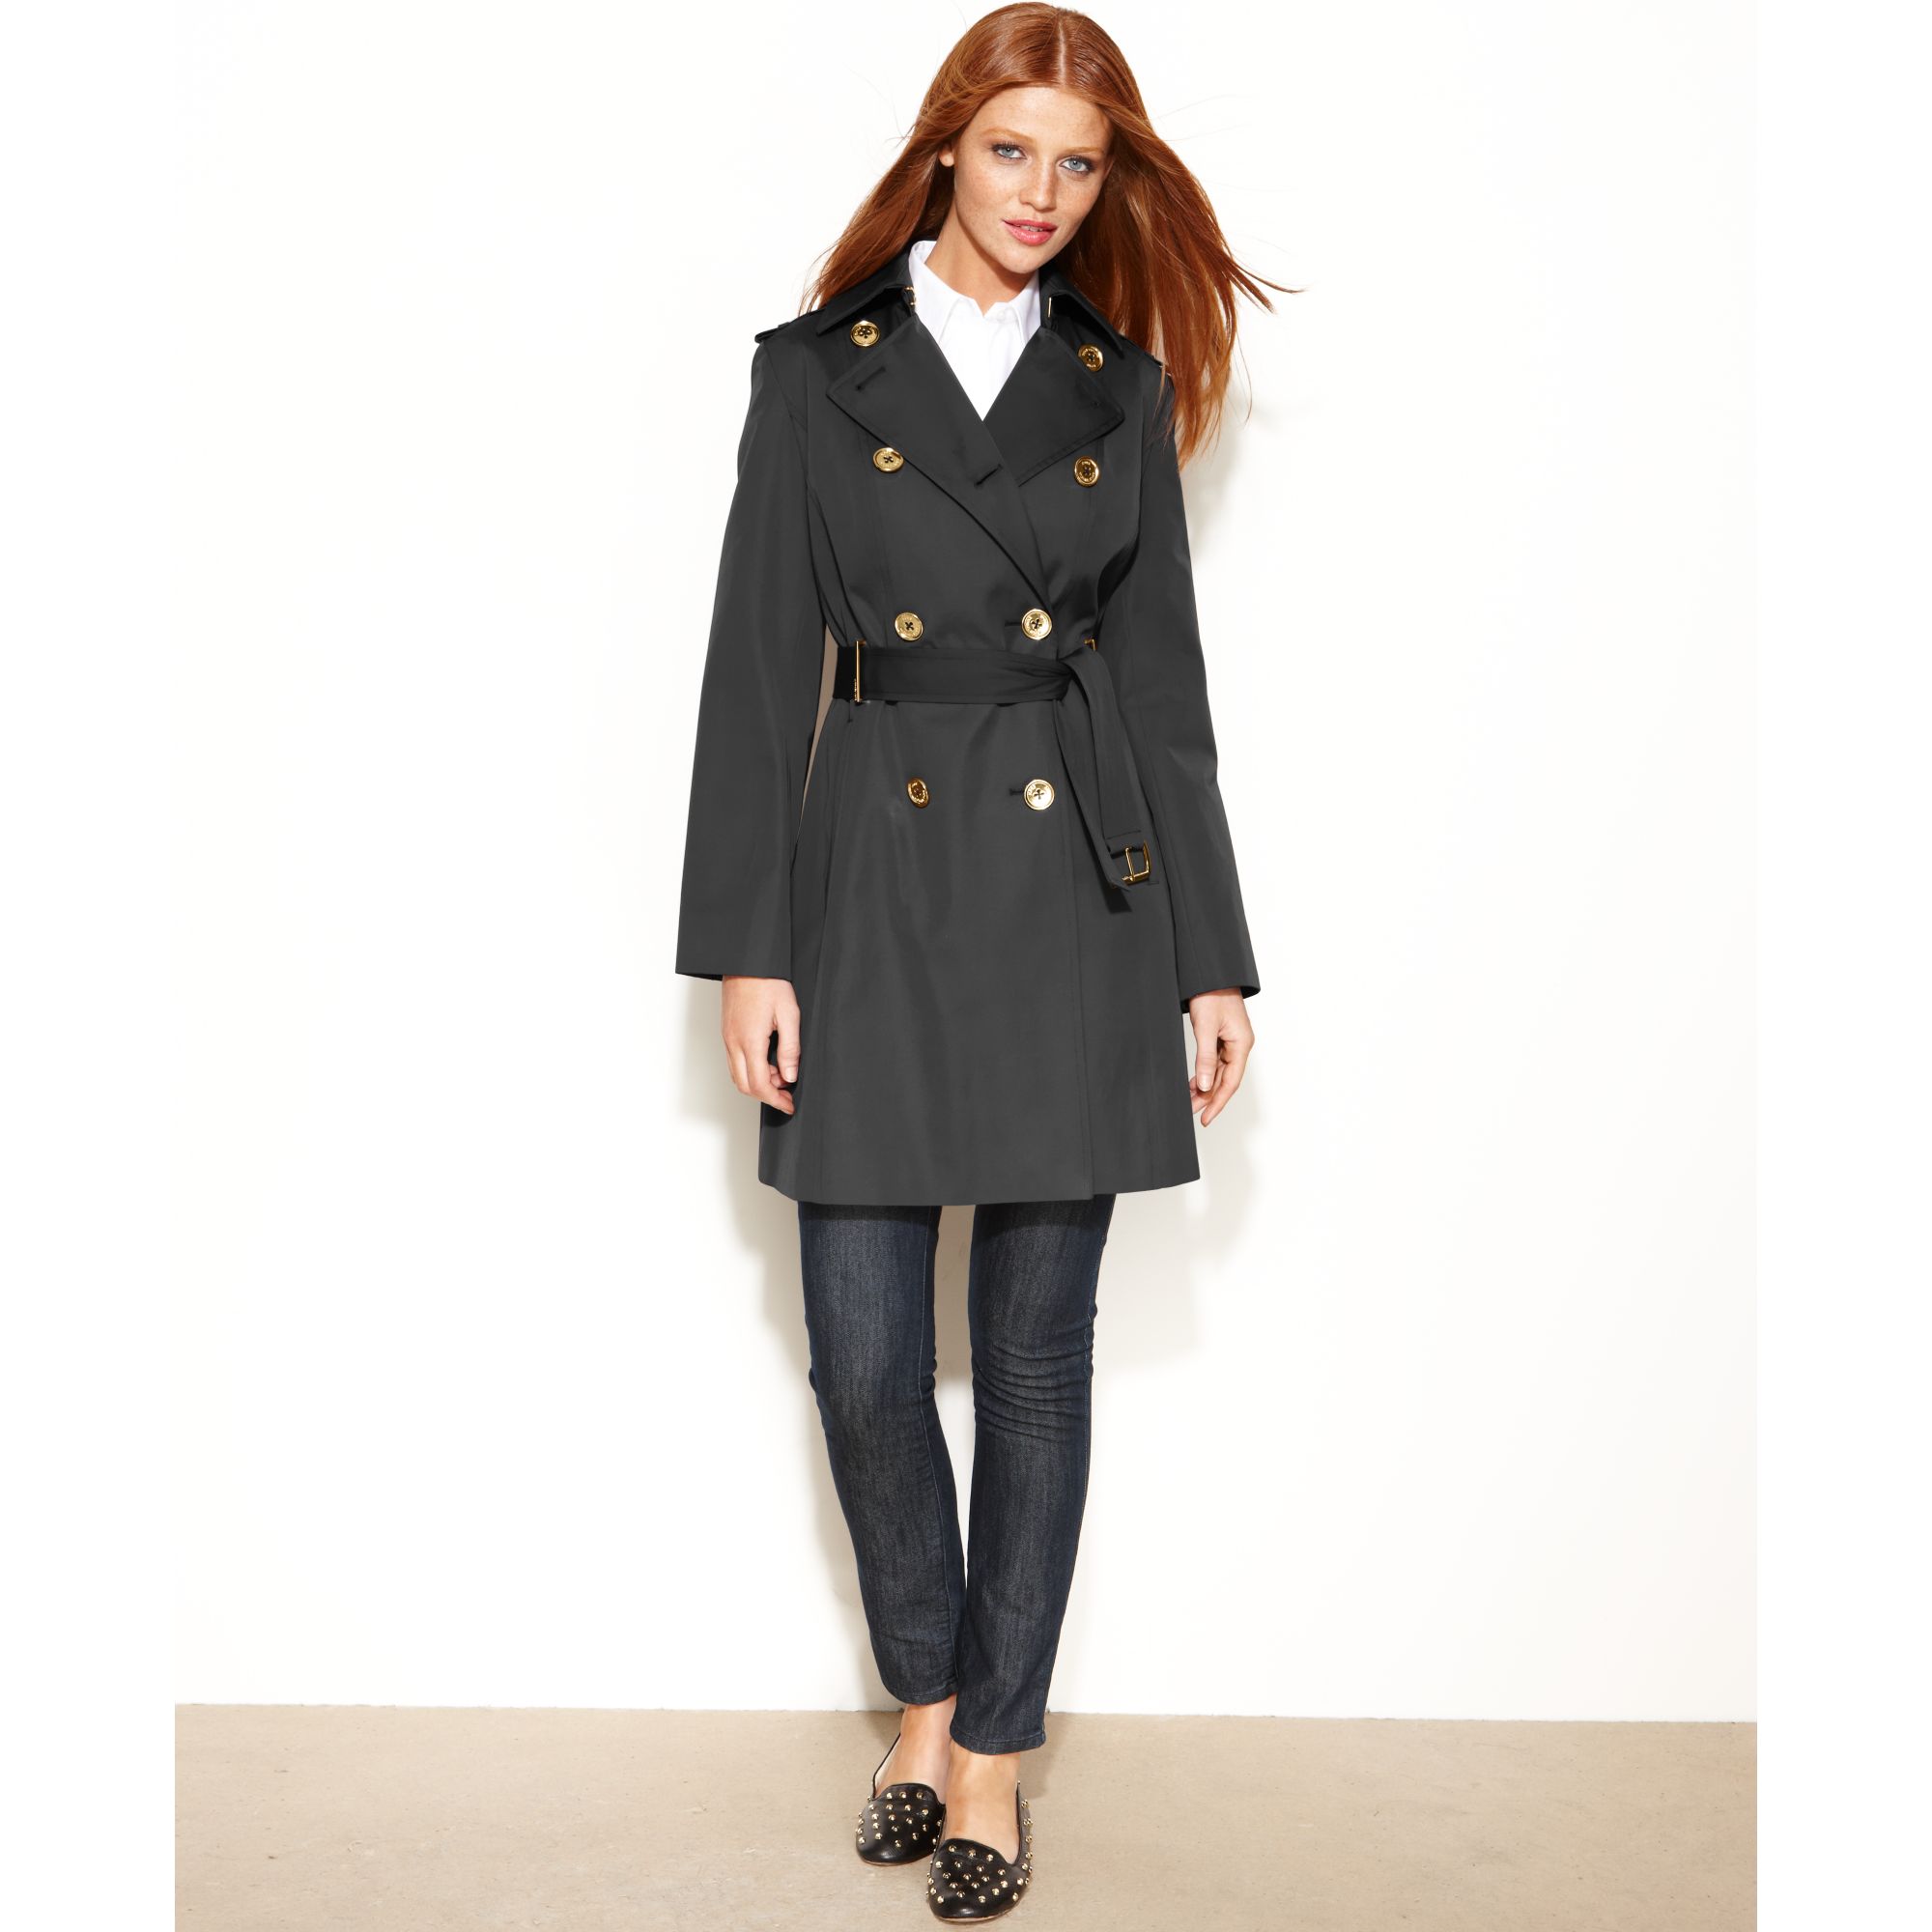 Lyst - Michael Kors Double breasted Belted Trench Coat in Black